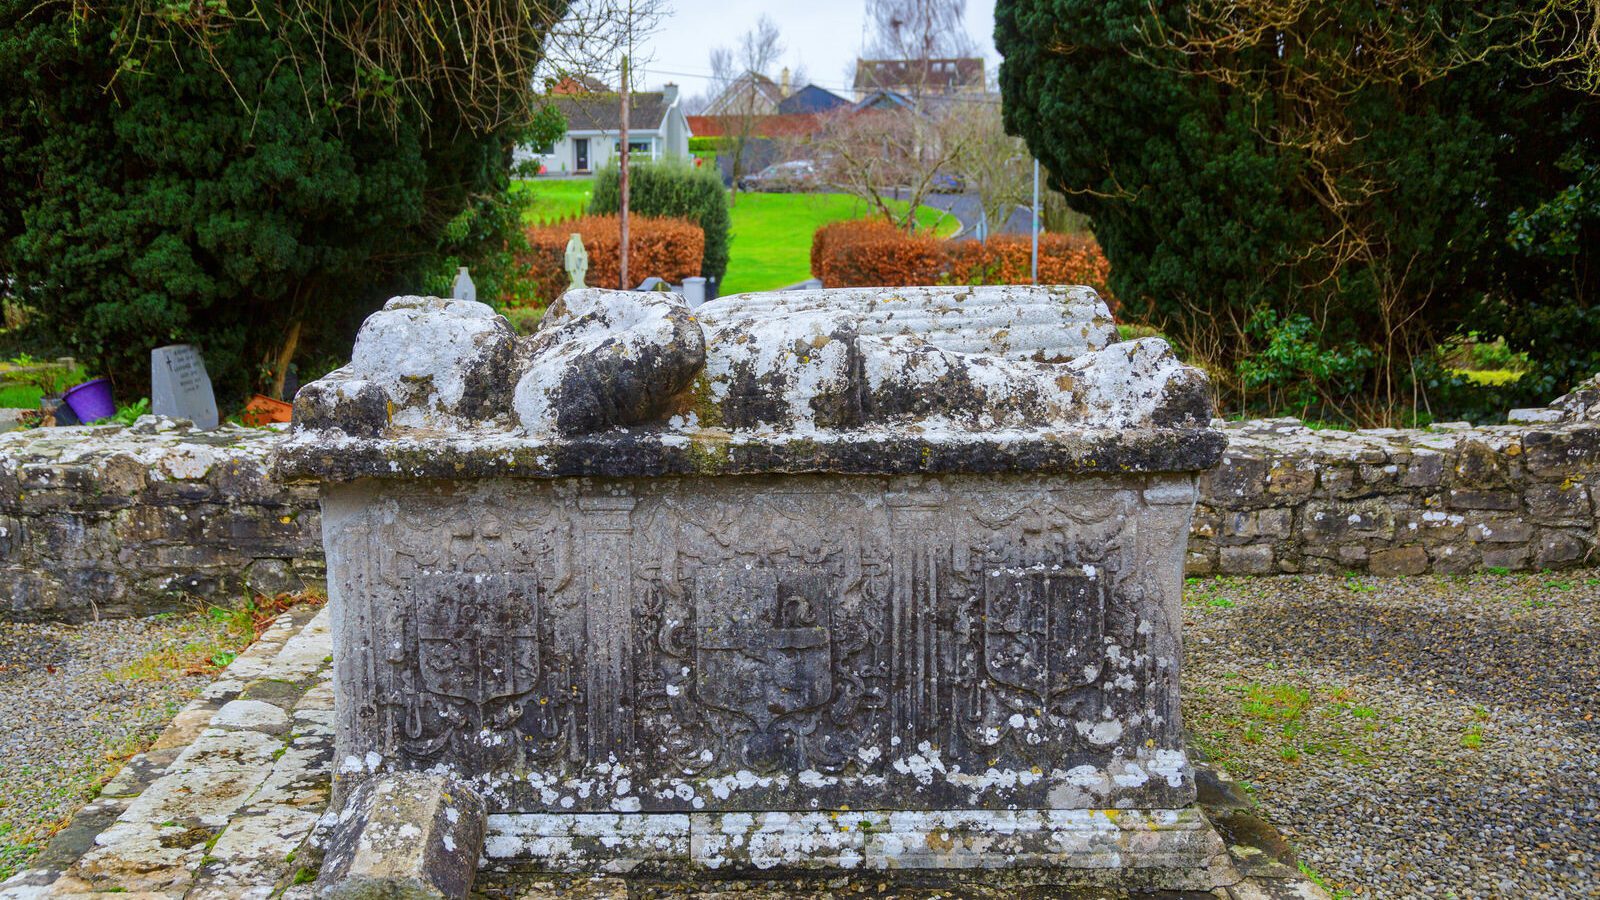 THE TOMB OF THE JEALOUS MAN AND WOMAN AND A CURE FOR WARTS [THE CEMETERY OF ST PETER AND PAULS CATHEDRAL IN TRIM]-226393-1